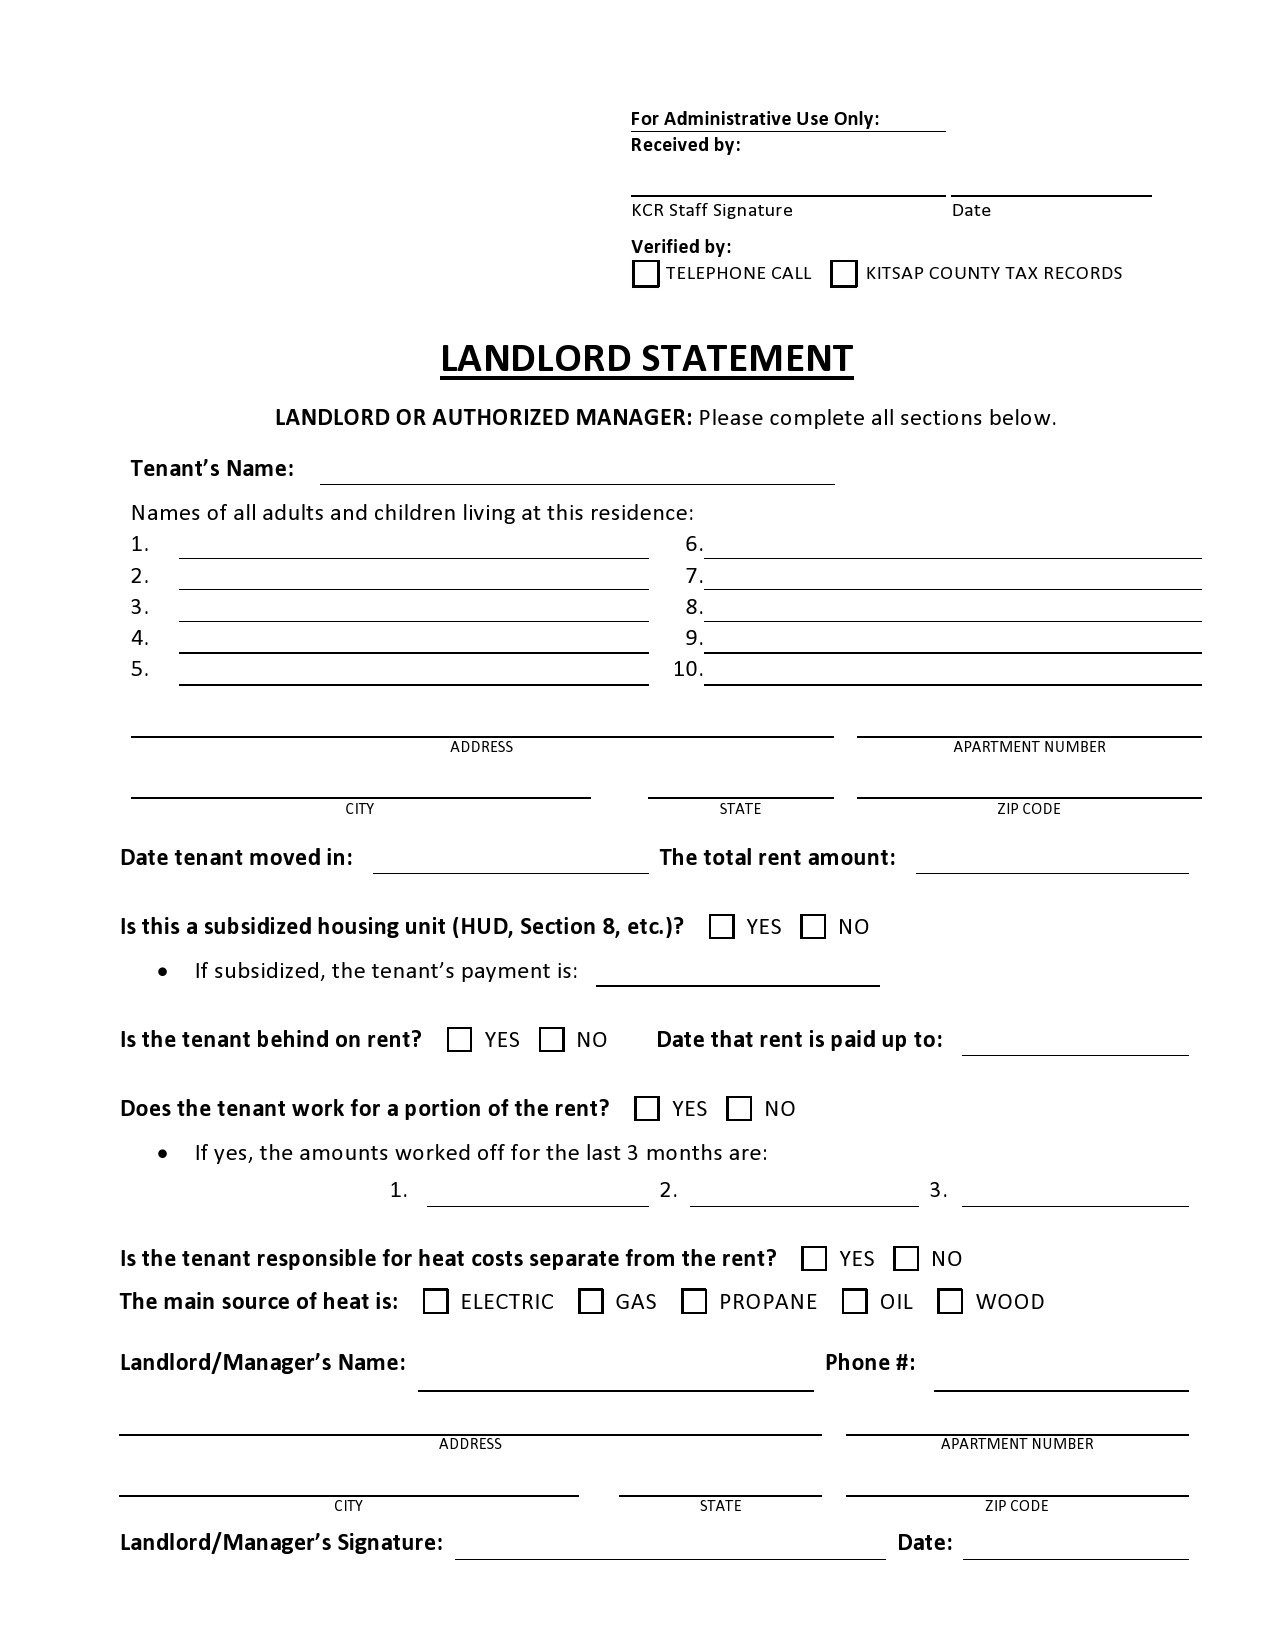 43 Perfect Landlord Statement Forms (& Letters) ᐅ TemplateLab